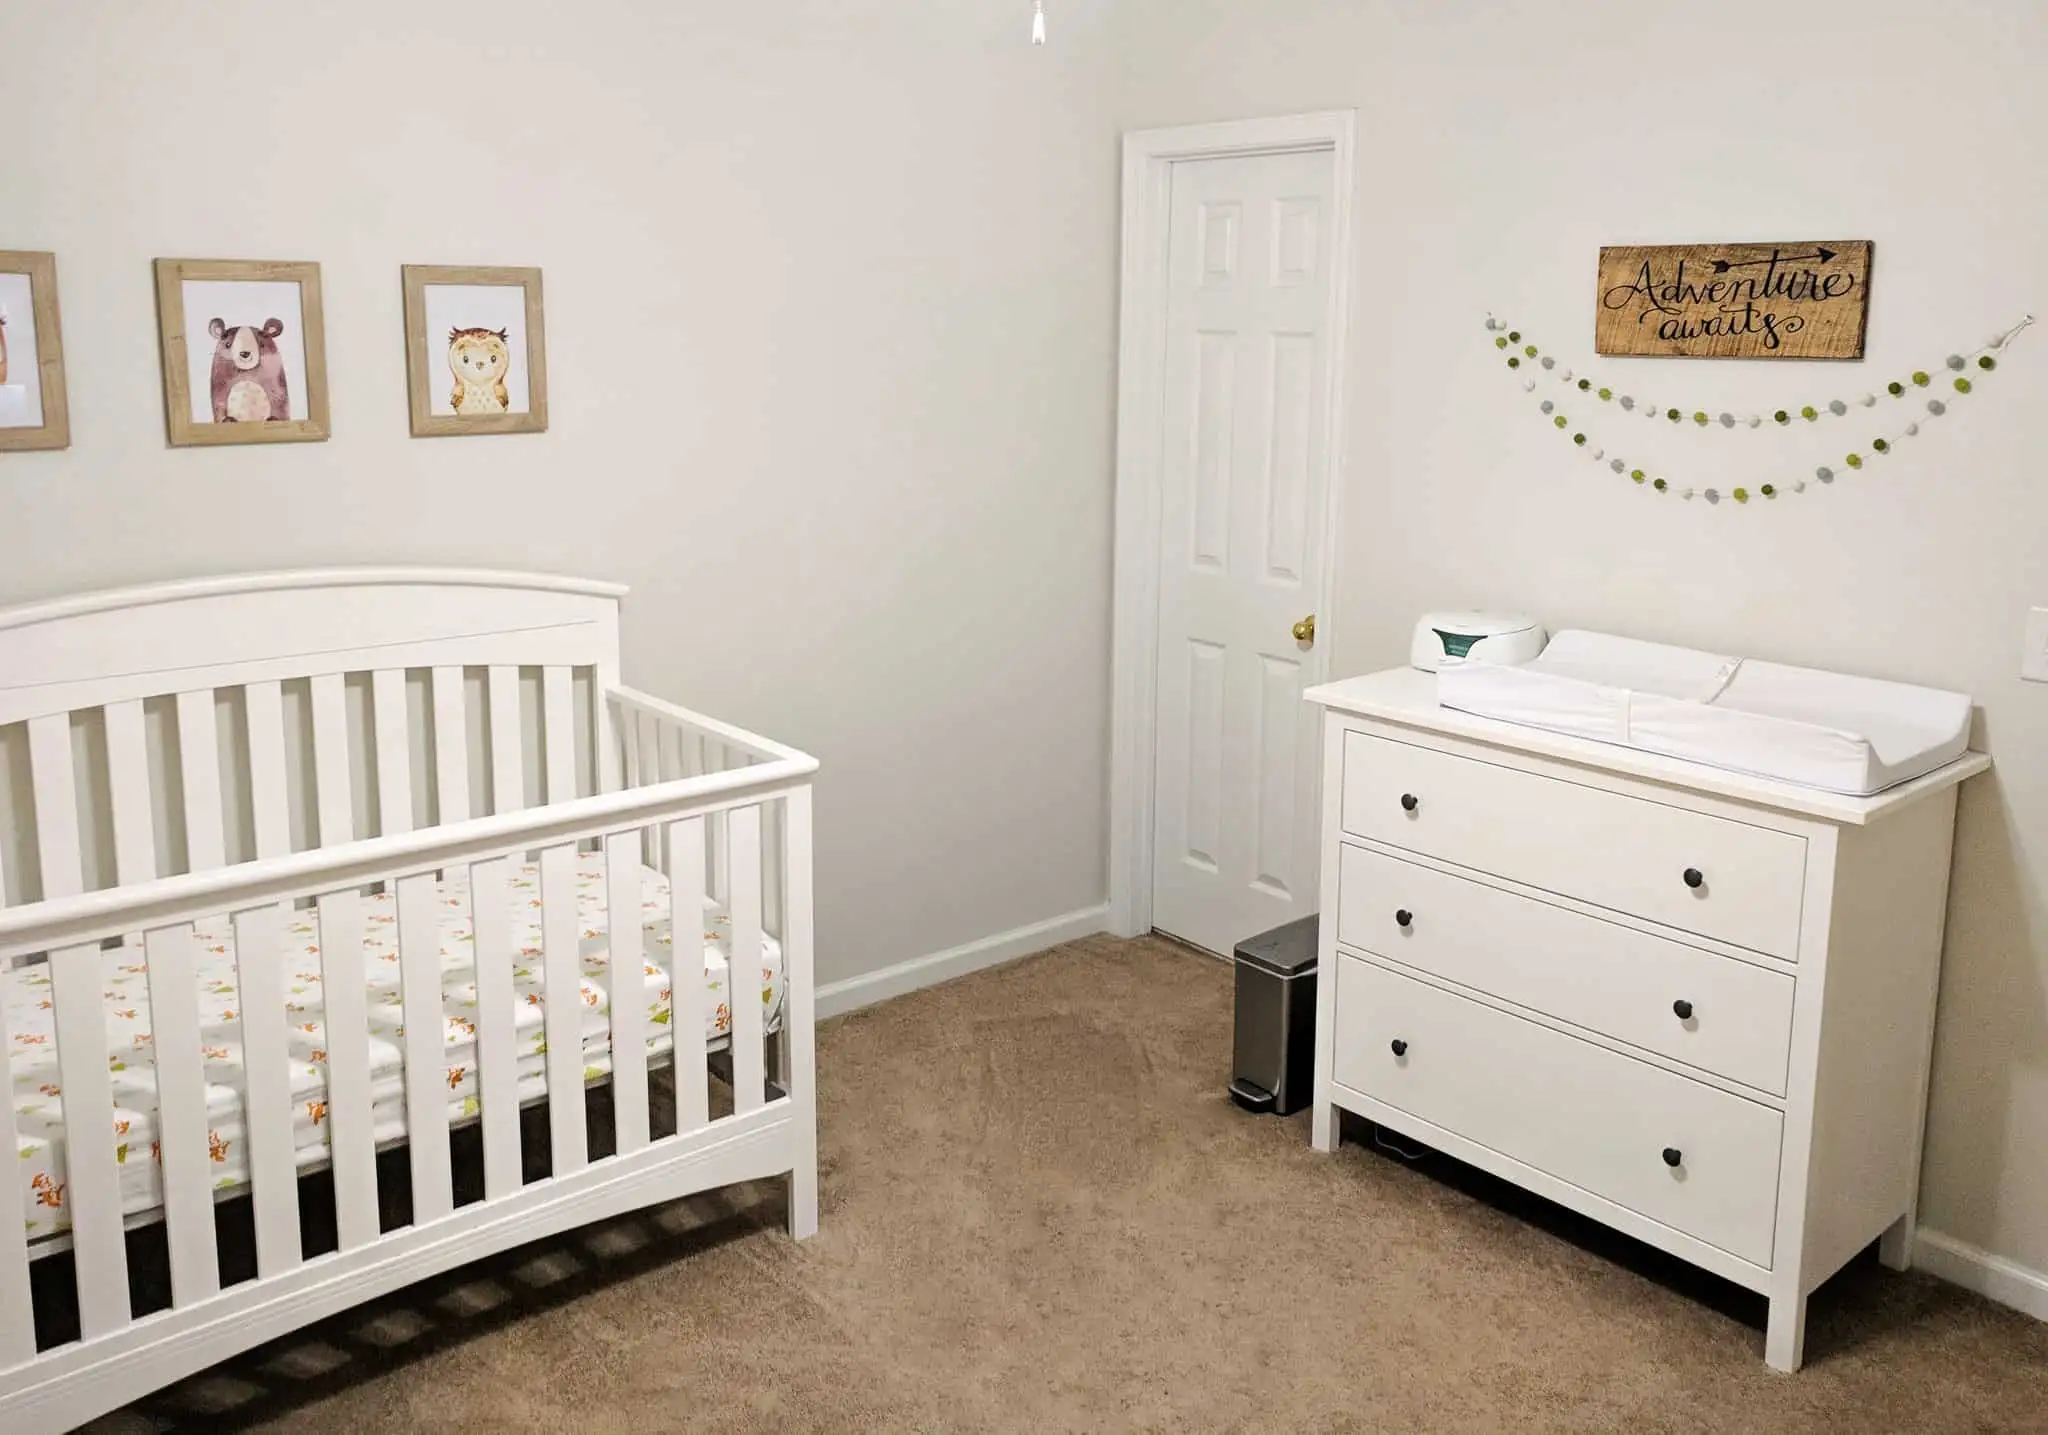 Make Your Baby’s Living Space Comfortable